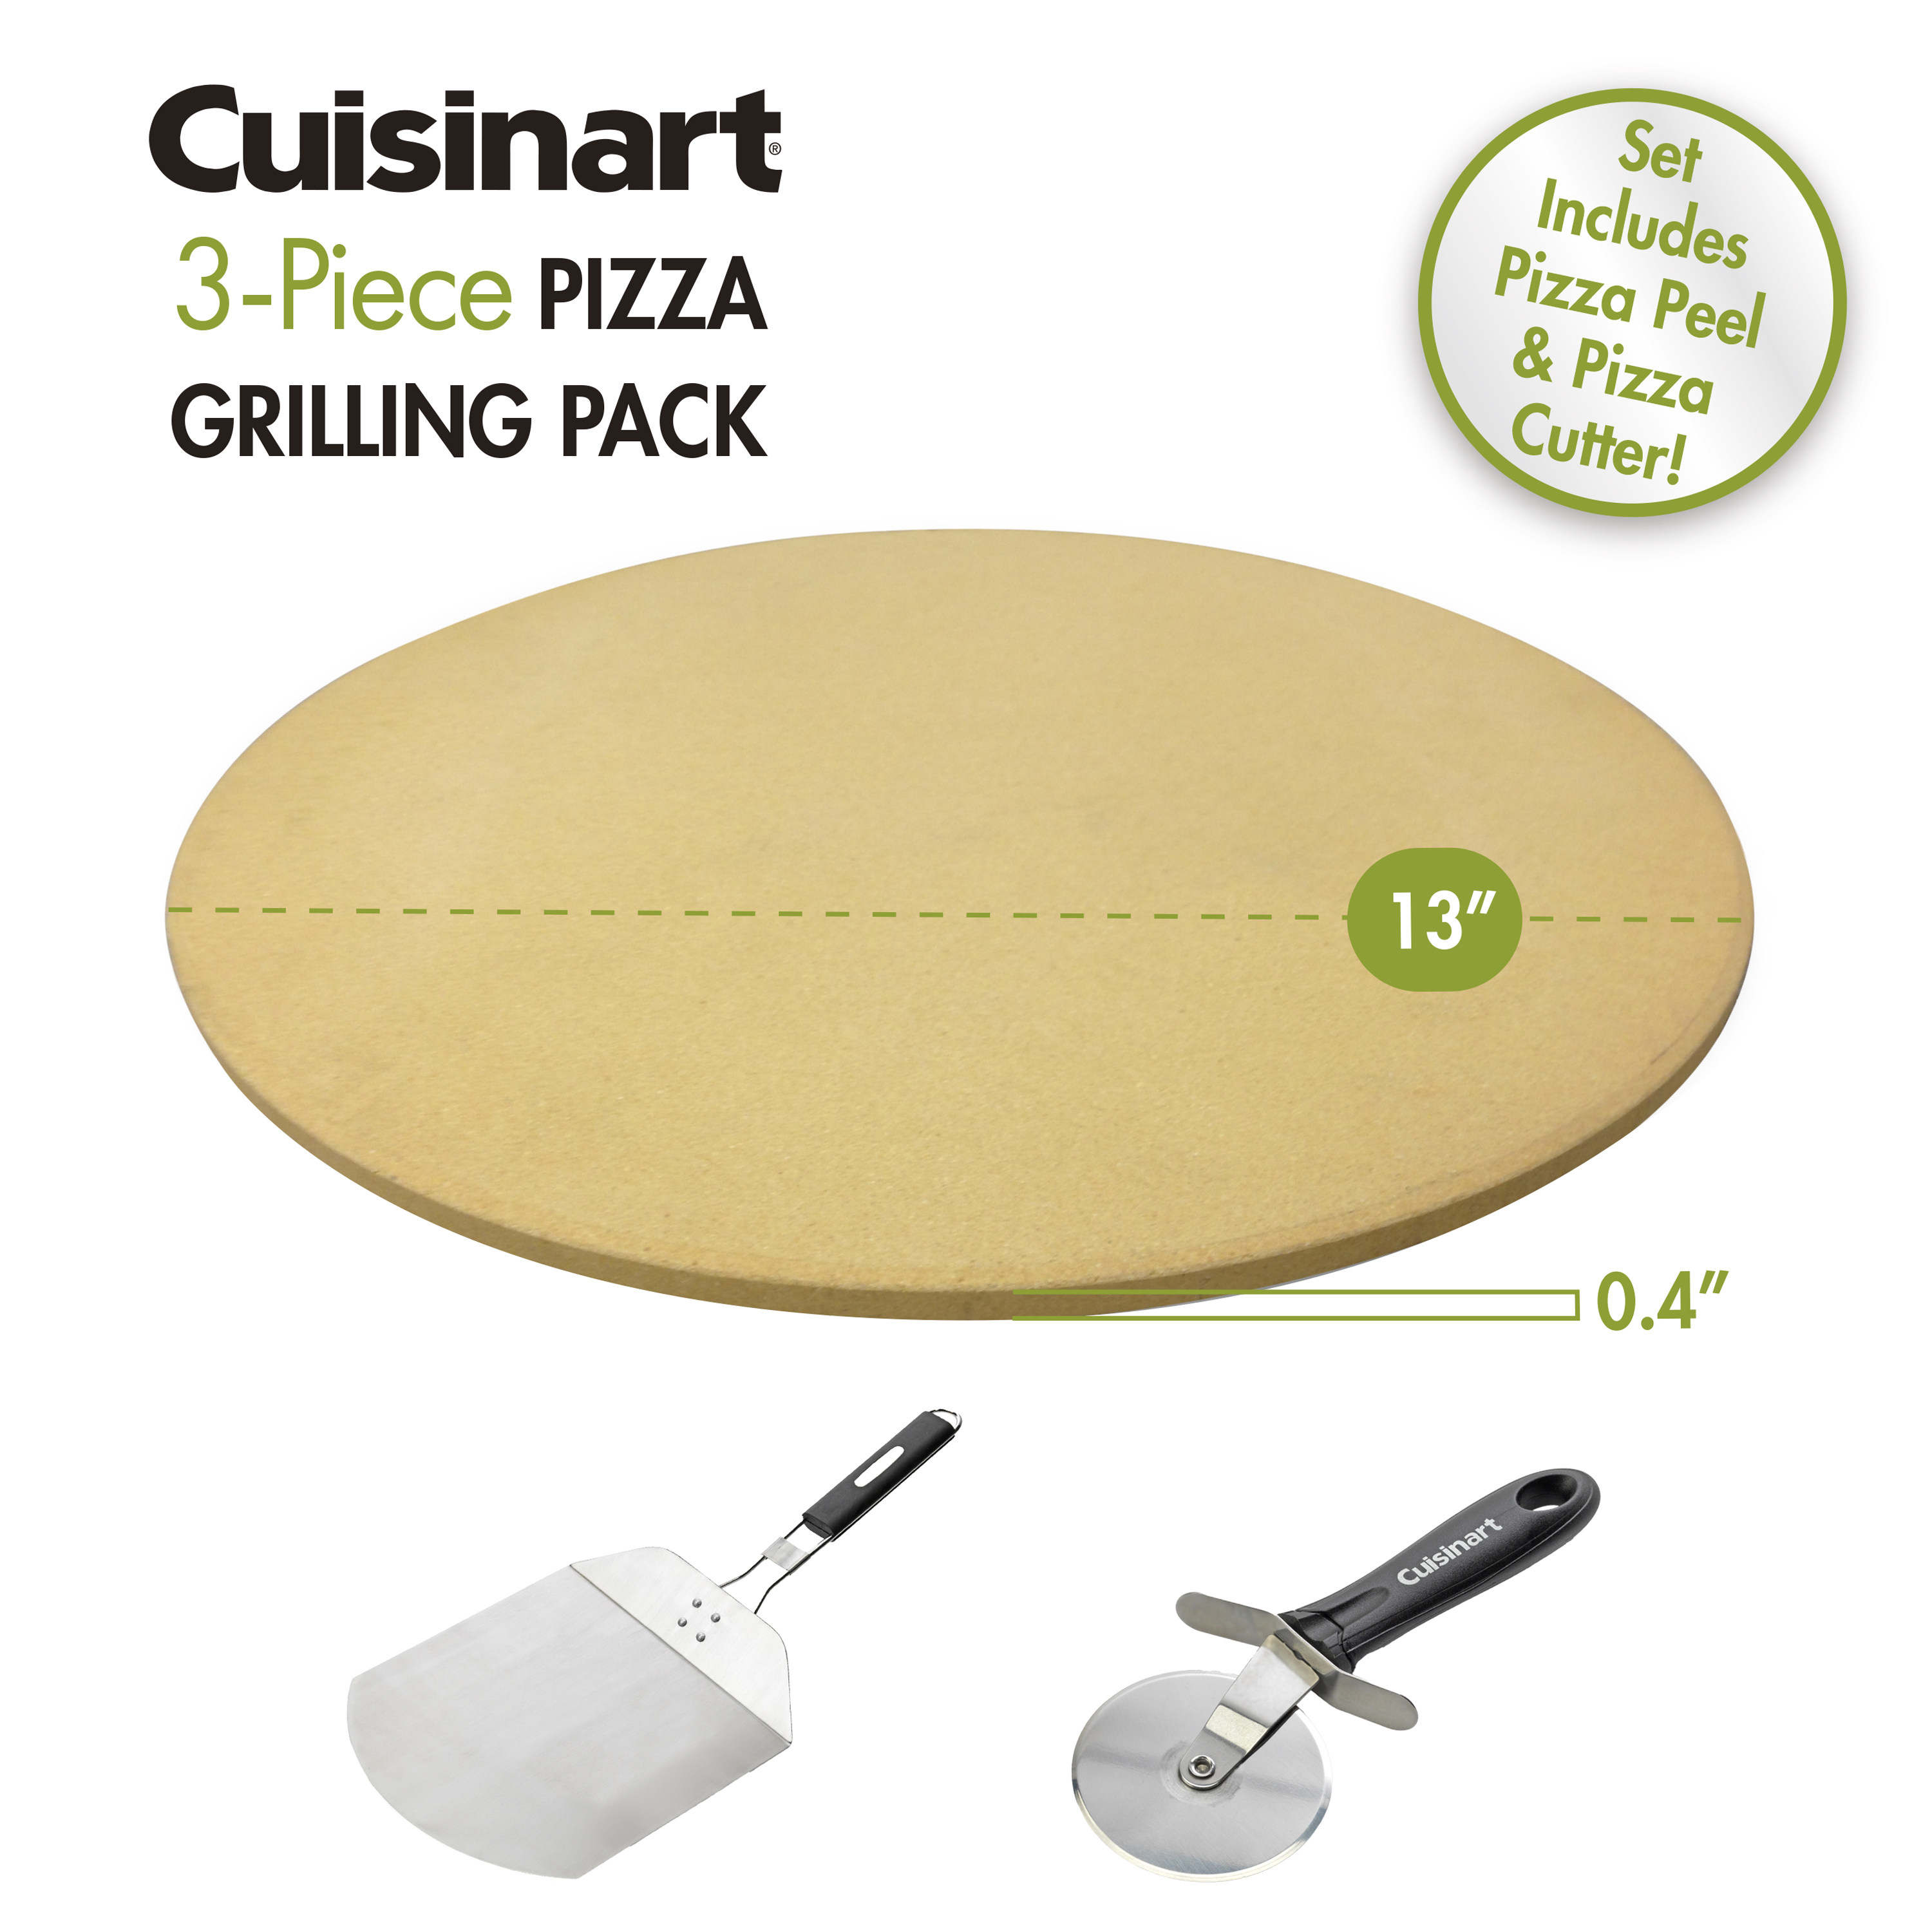 Cuisinart CPS-445 Pizza Grilling Set BBQ Tools Accessories Outdoor Cooking Yard 